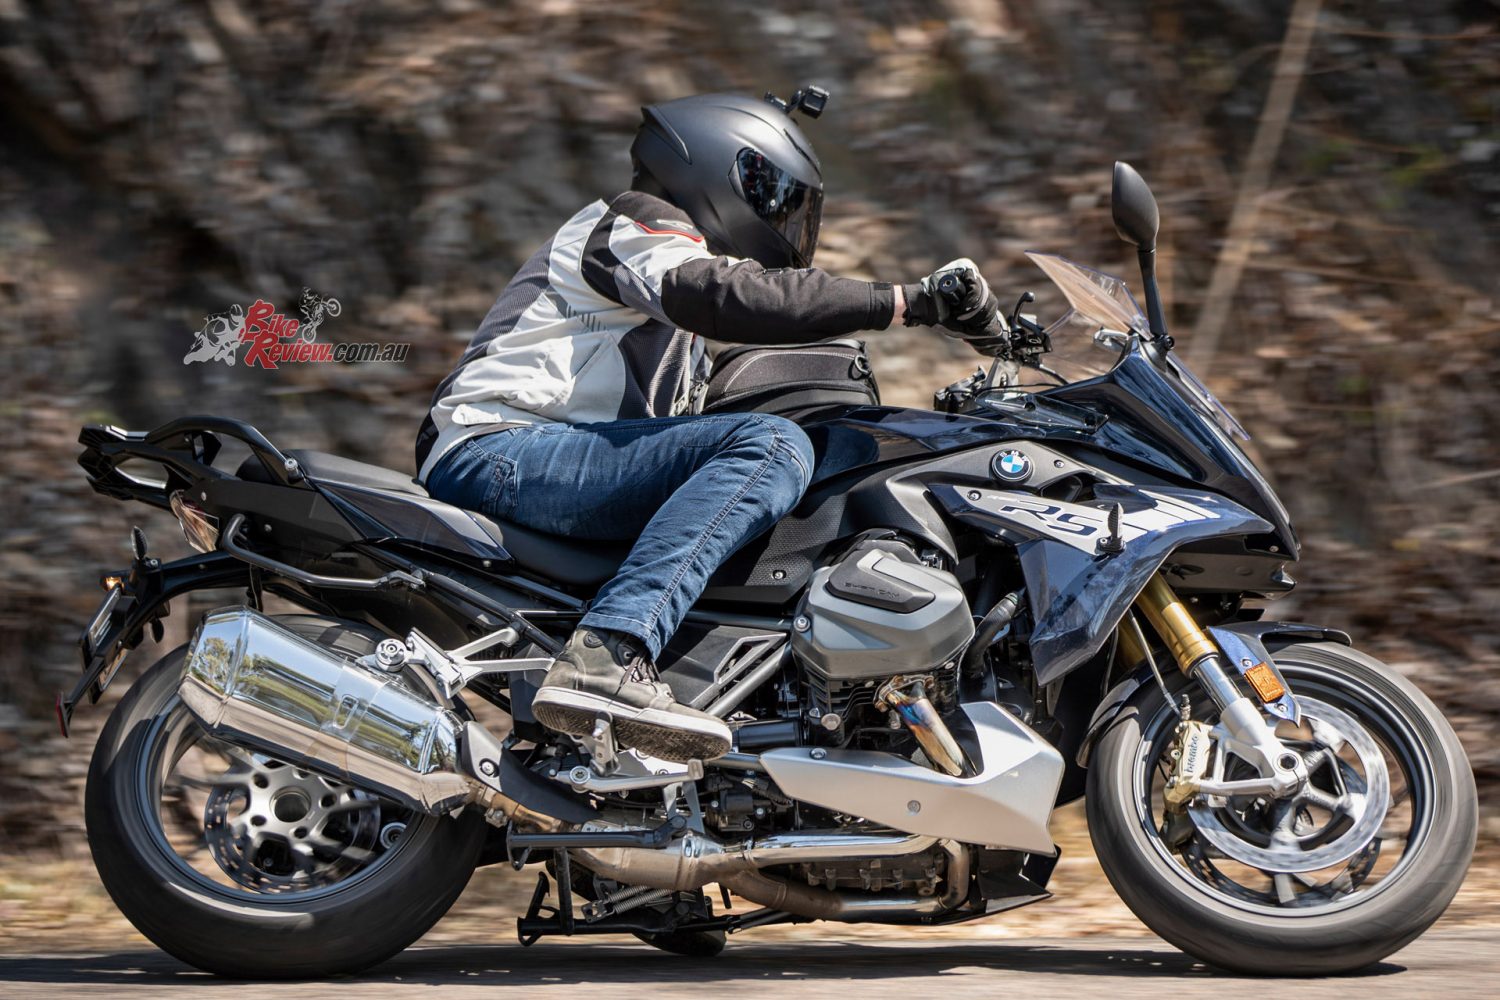 The new BMW R 1250 R, R 1250 RS and the new R 1250 GS 